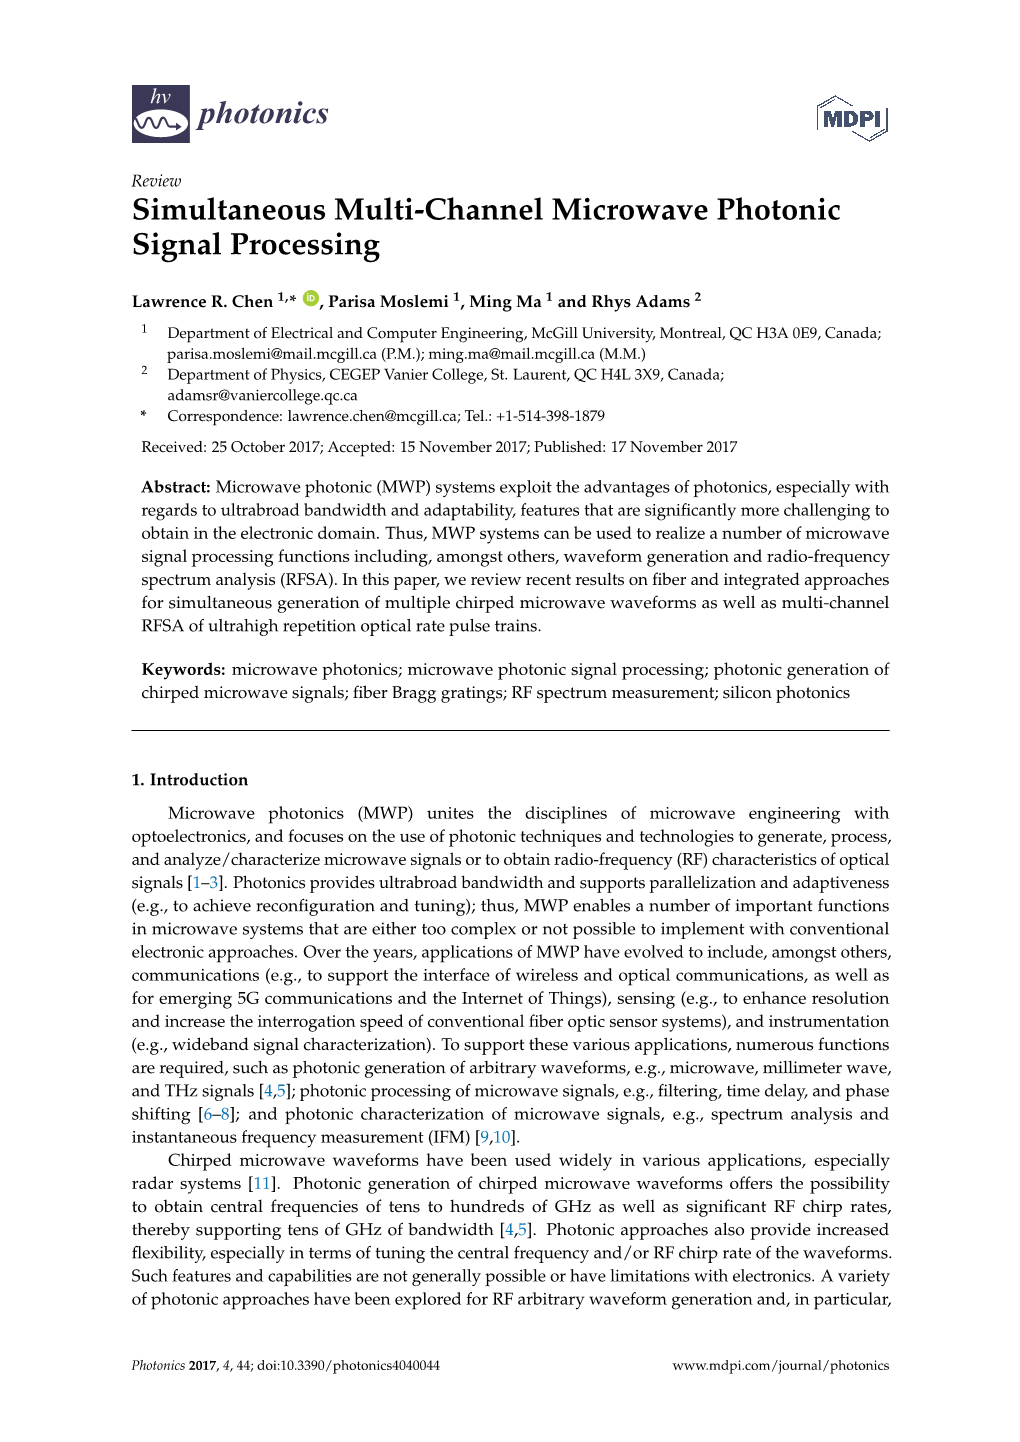 Simultaneous Multi-Channel Microwave Photonic Signal Processing